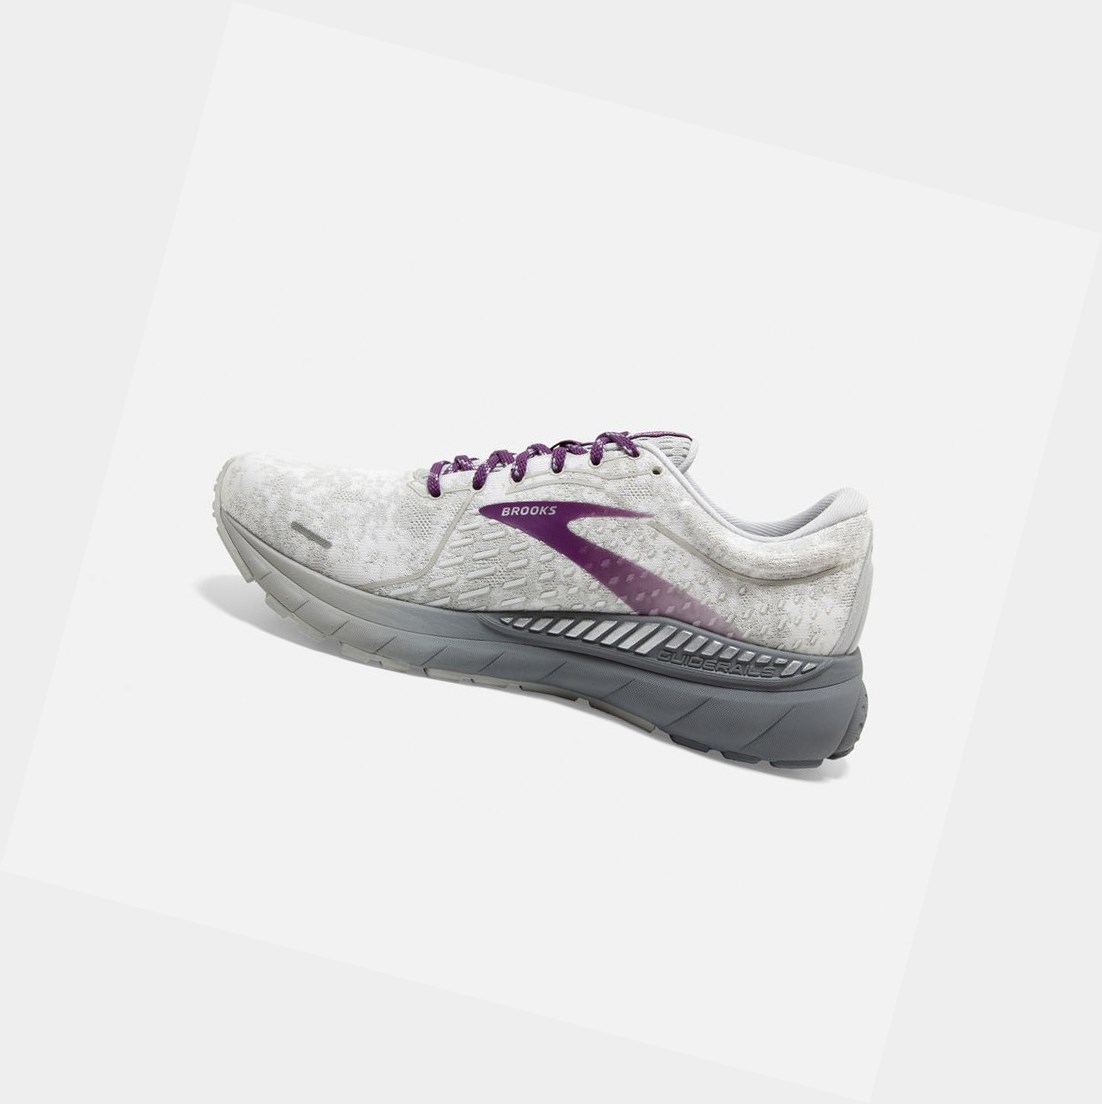 Brooks Adrenaline GTS 21 Women's Road Running Shoes White / Oyster / Primer Grey | CGNL-19245